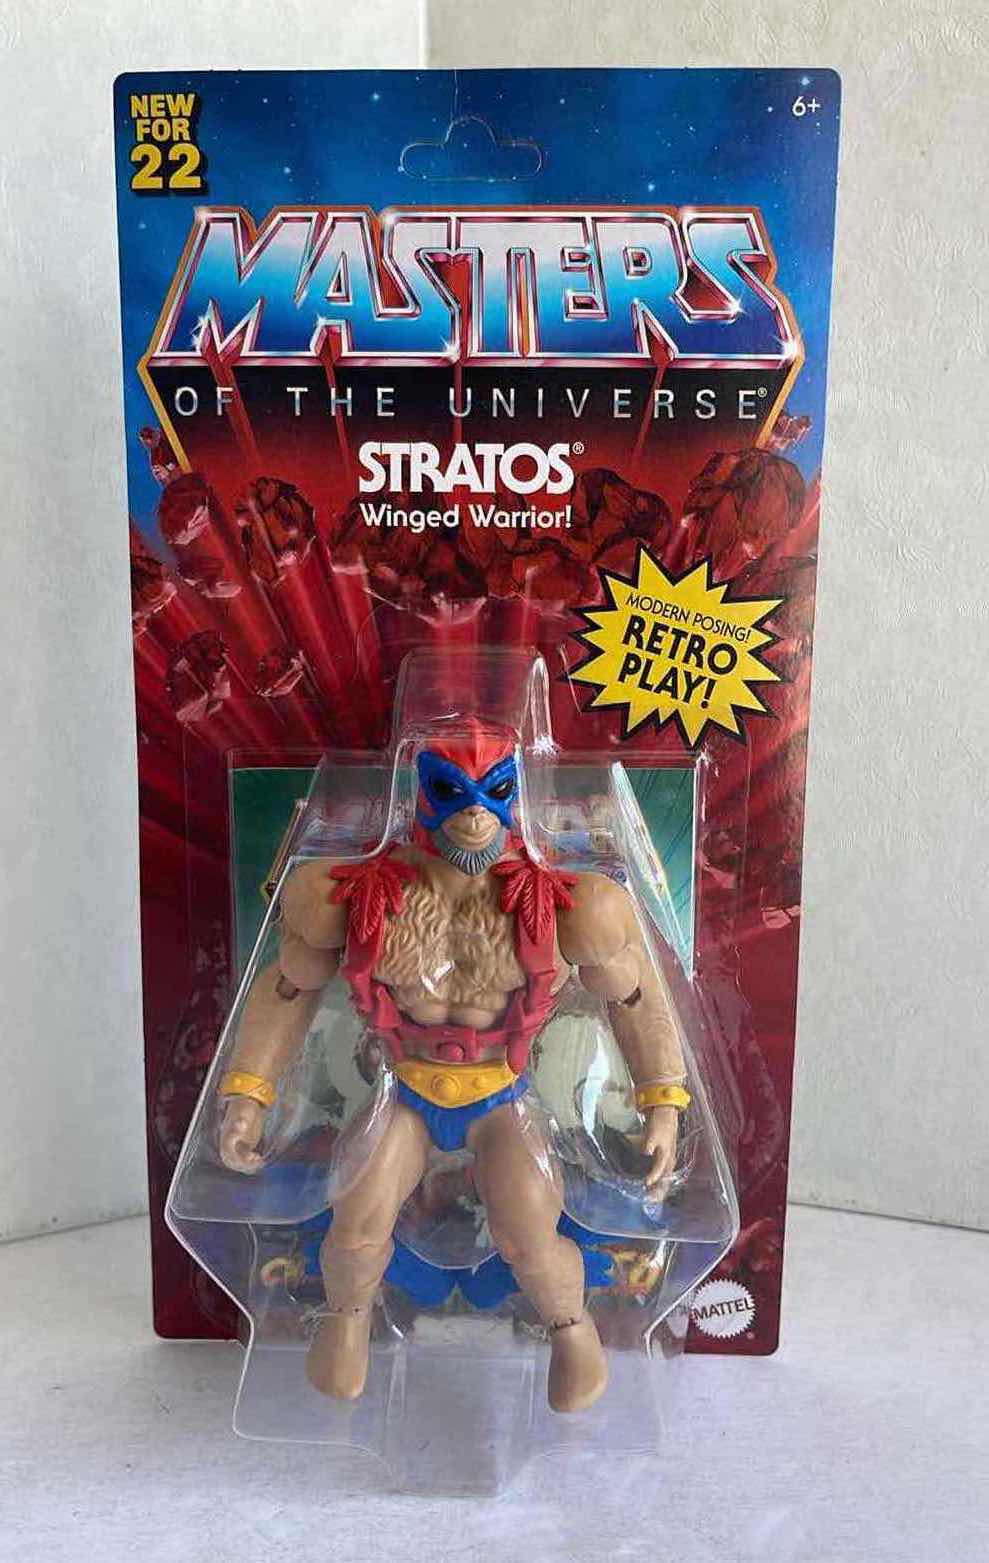 Photo 1 of NIB MASTERS OF THE UNIVERSE STRATOS WINGED WARRIOR!  RETRO PLAY MSRP $29.99